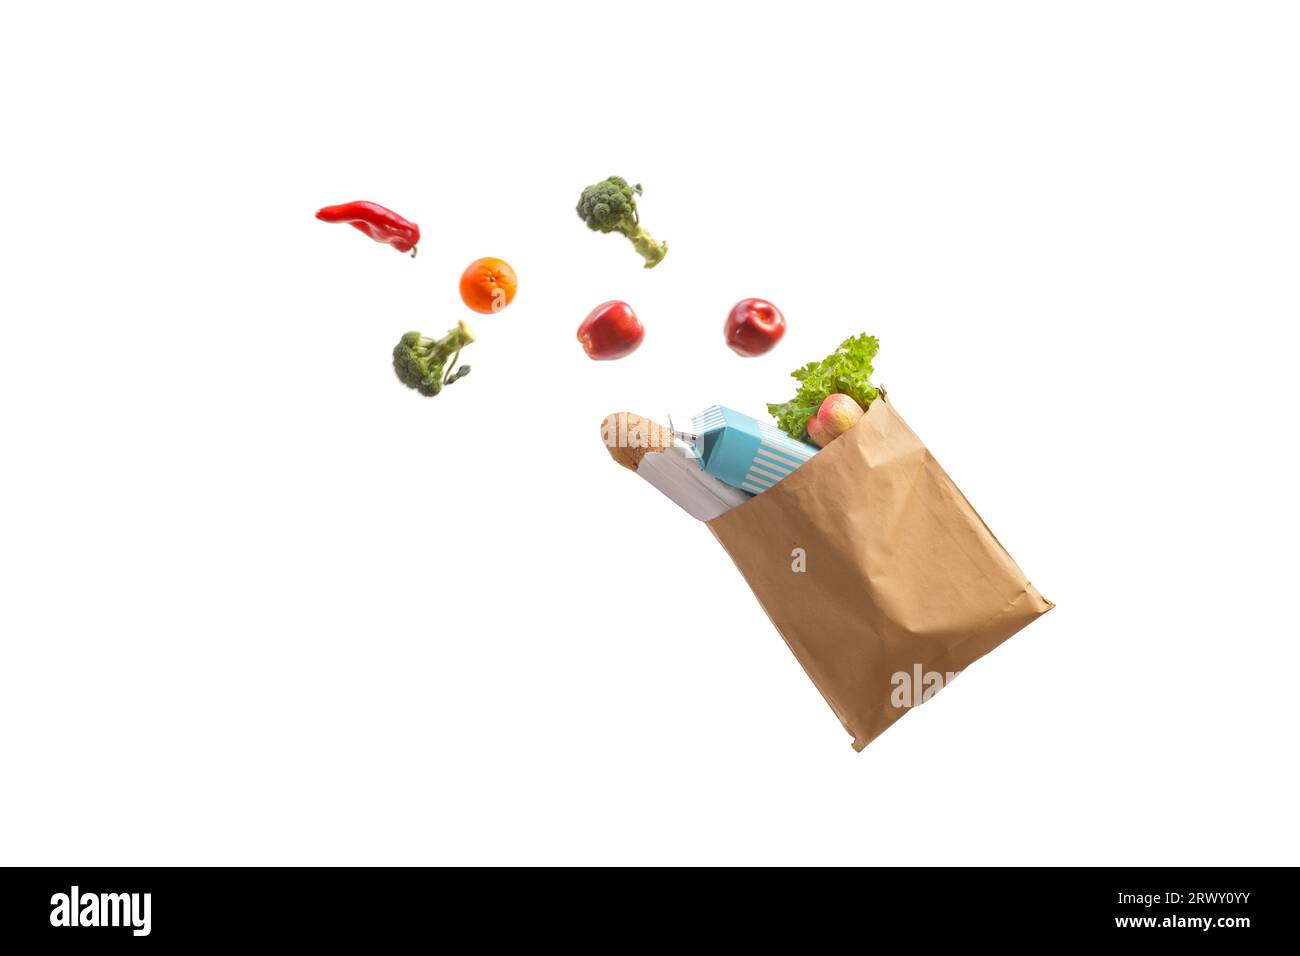 Paper shopping bag with products in the air falling isolated on white background Stock Photo